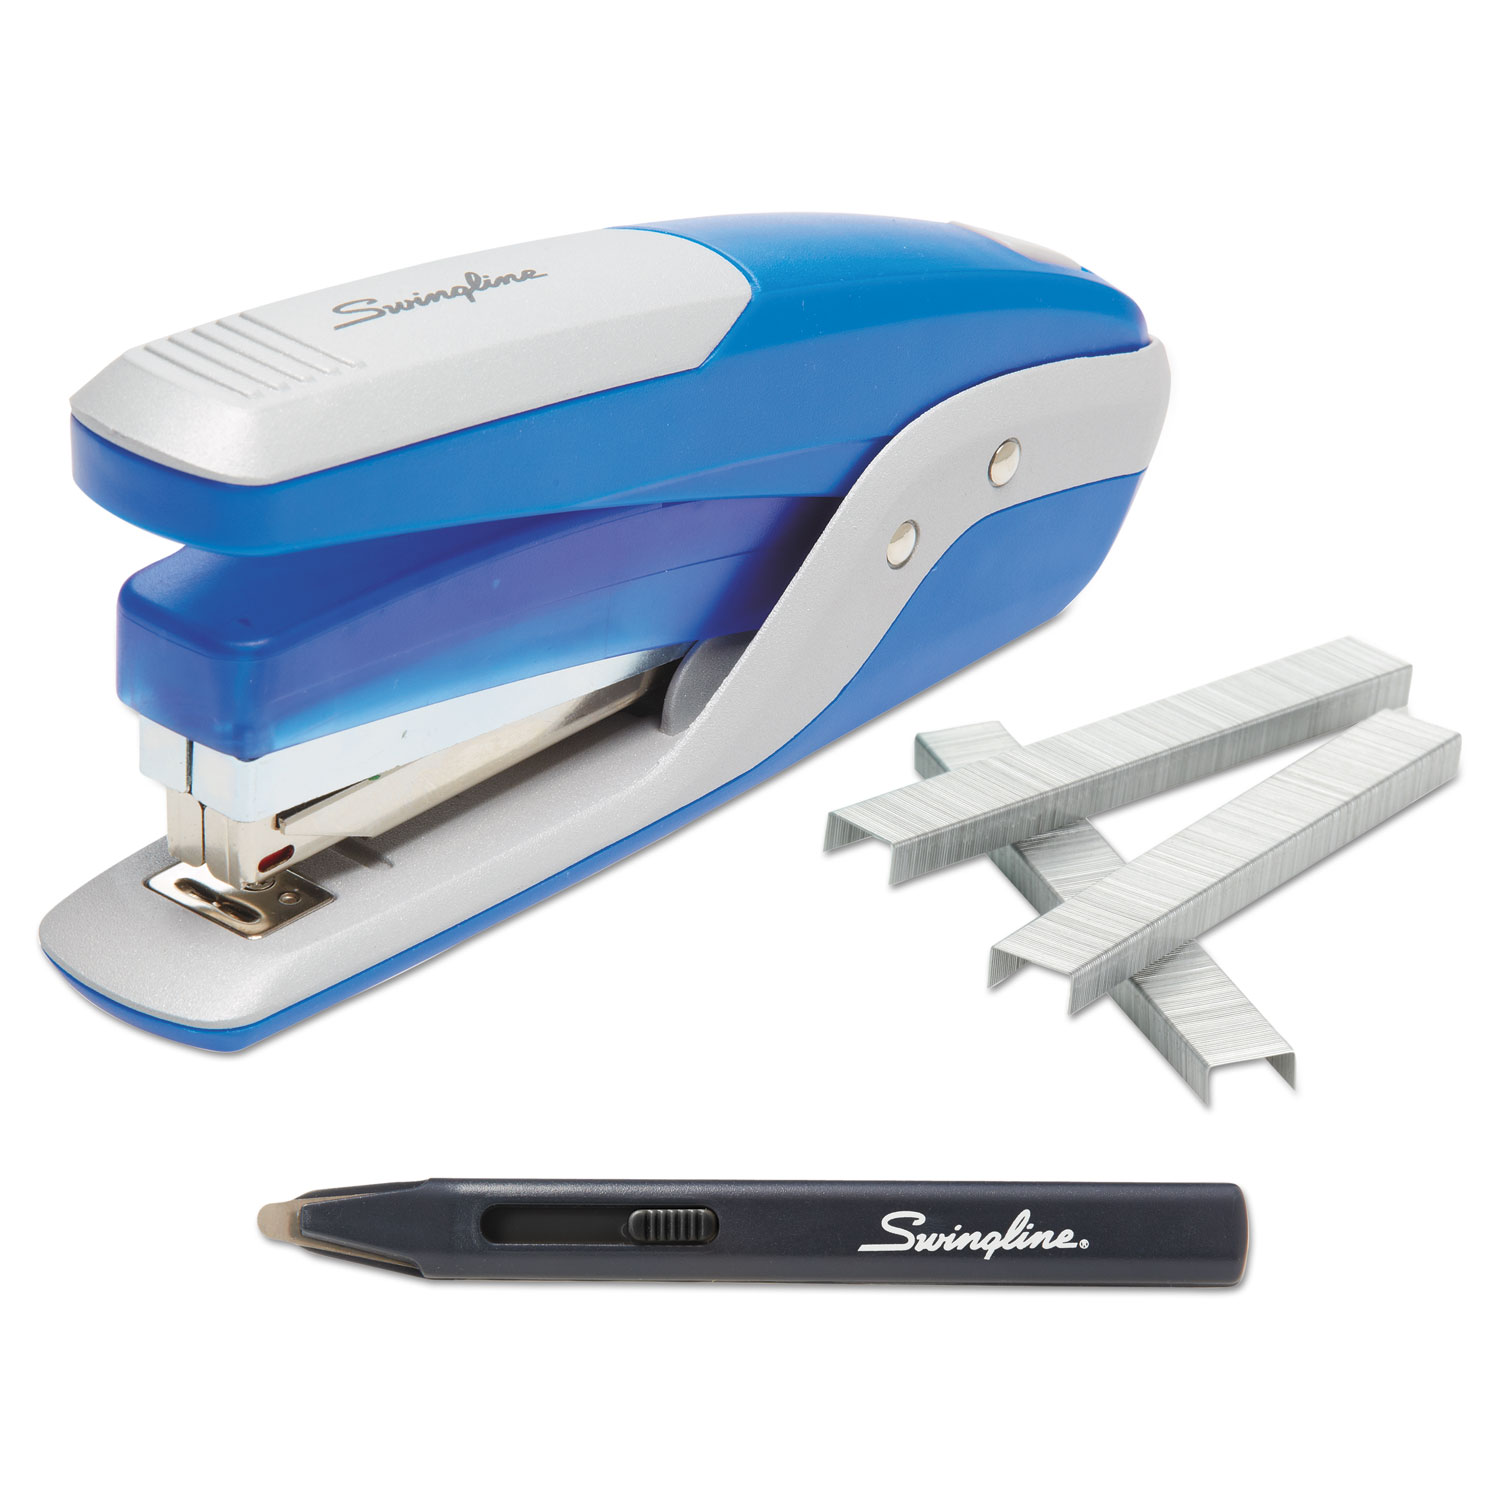  Swingline S7064584A Quick Touch Stapler Value Pack, 28-Sheet Capacity, Blue/Silver (SWI64584) 